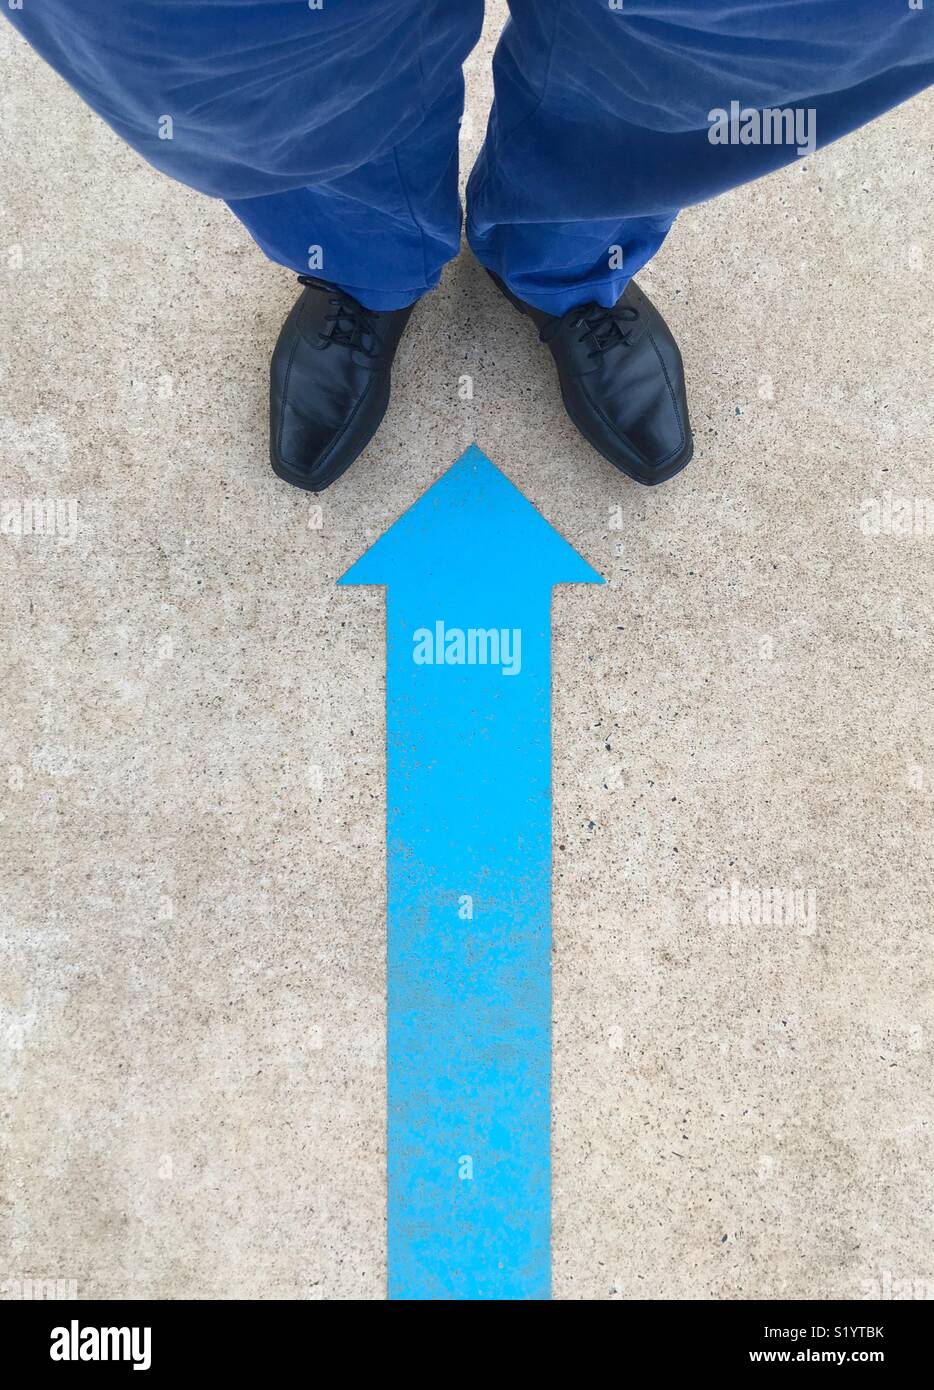 A blue arrow painted on the ground pointing to a man’s black shoes and blue pants. Stock Photo